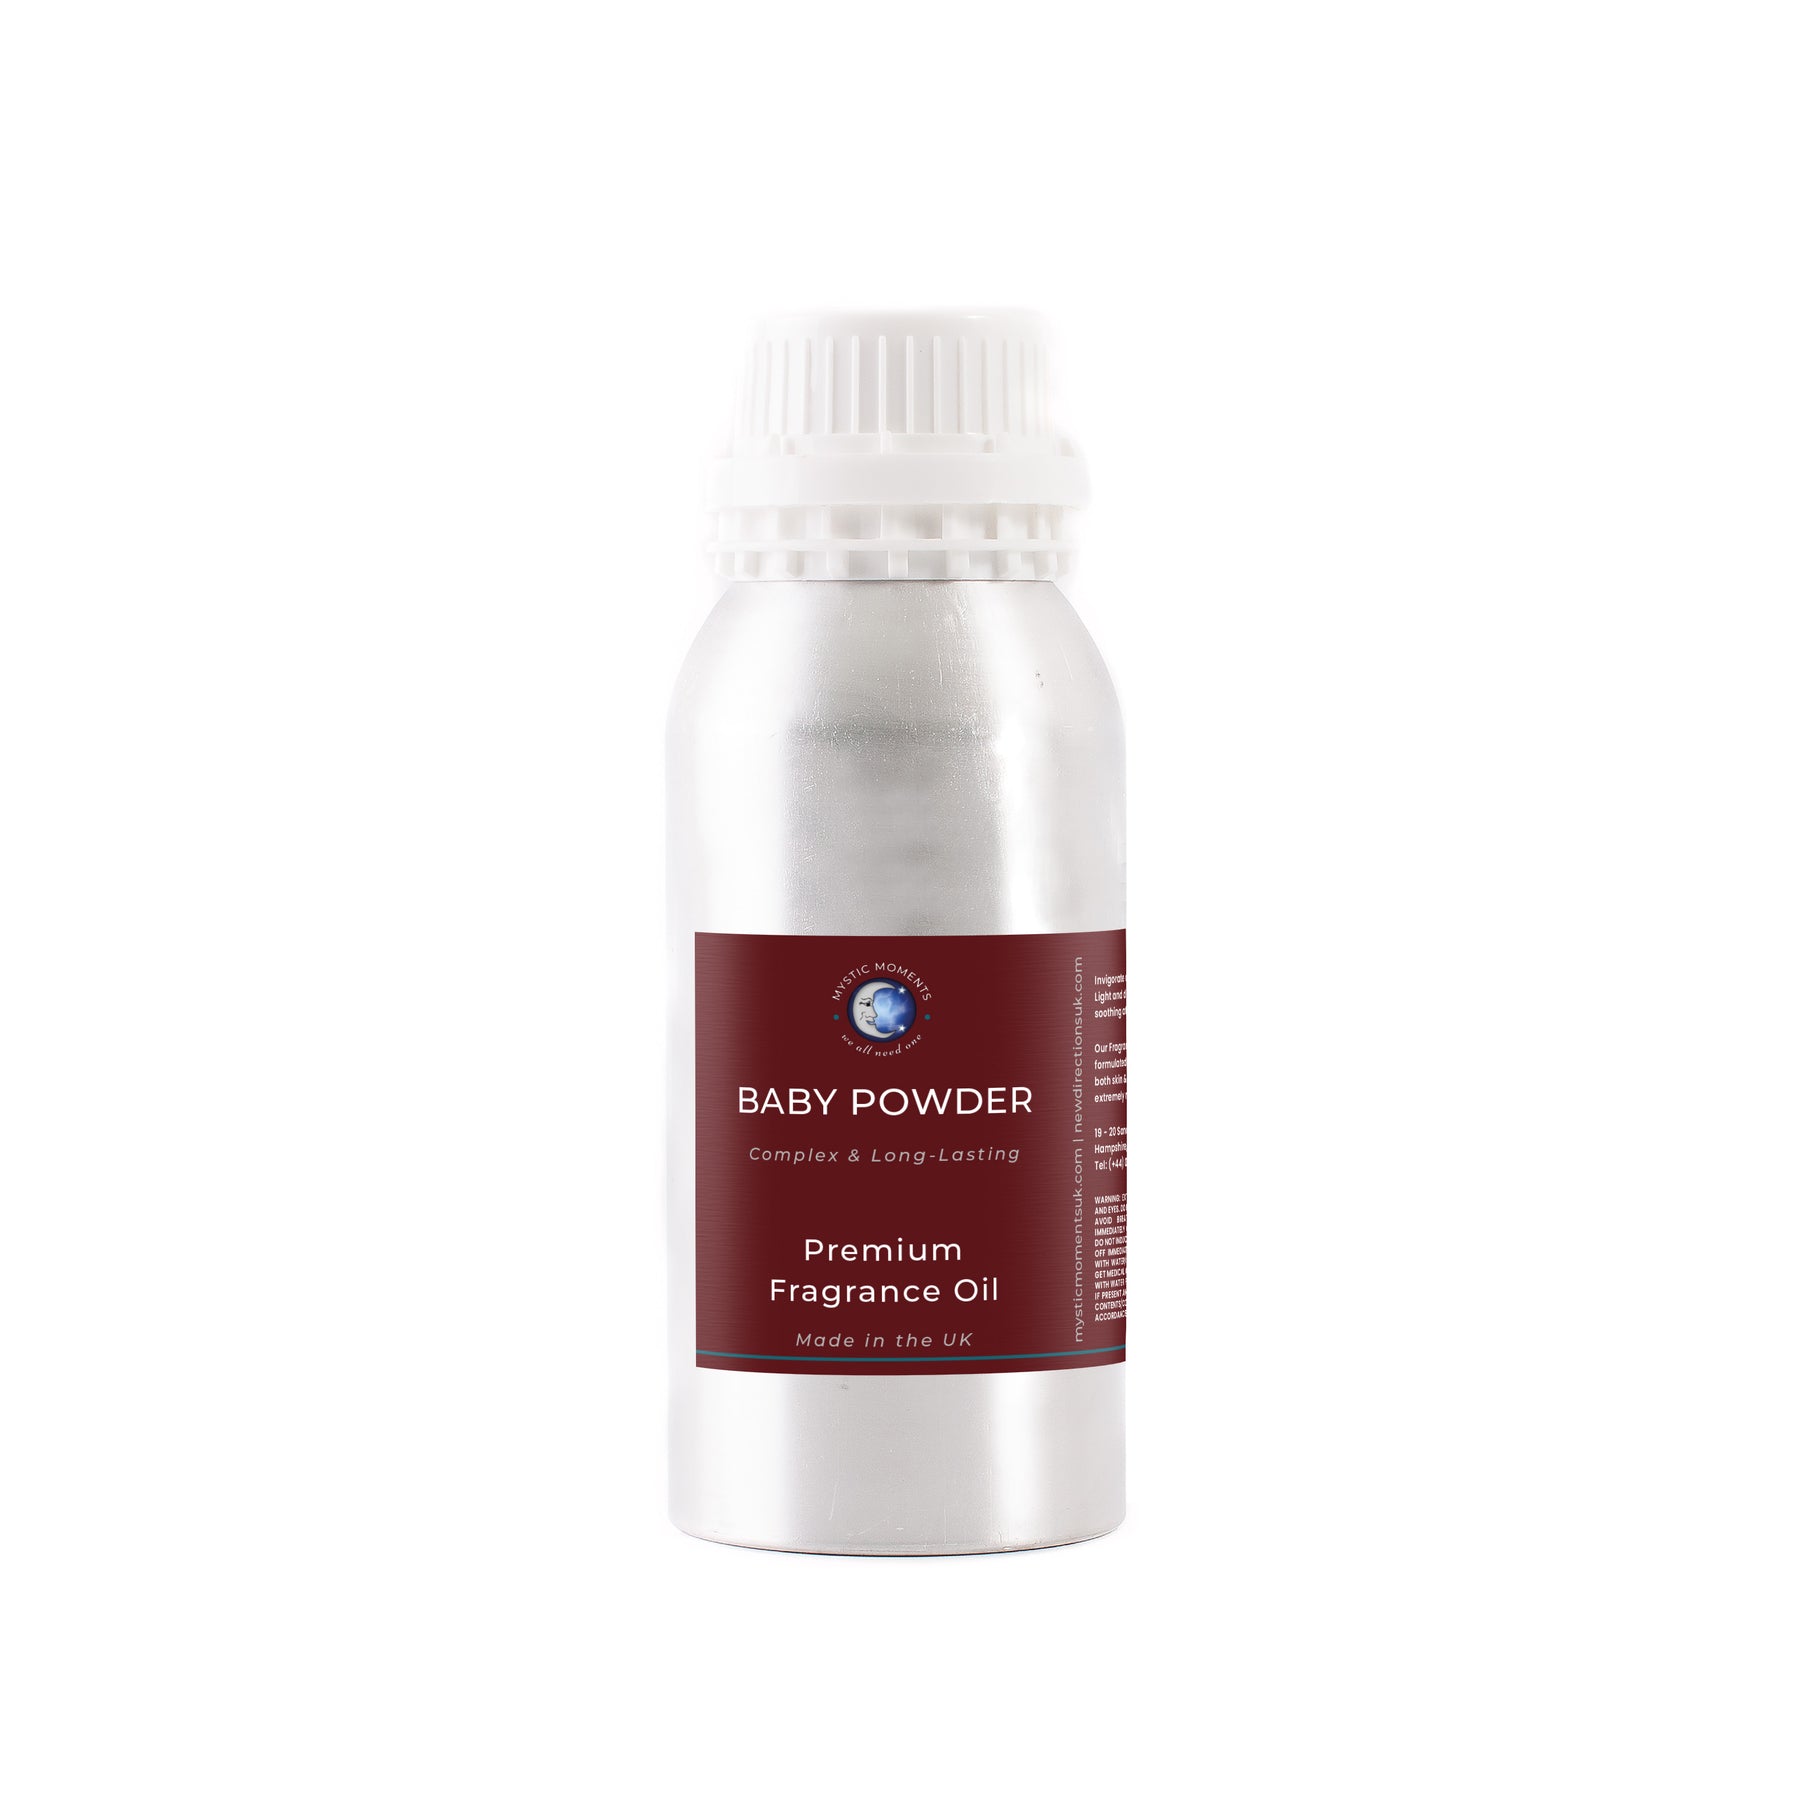 Baby Powder Fragrance Oil Great Exotic Smell and Long lasting (1 oz glass  Roll on bottle) Onisavings